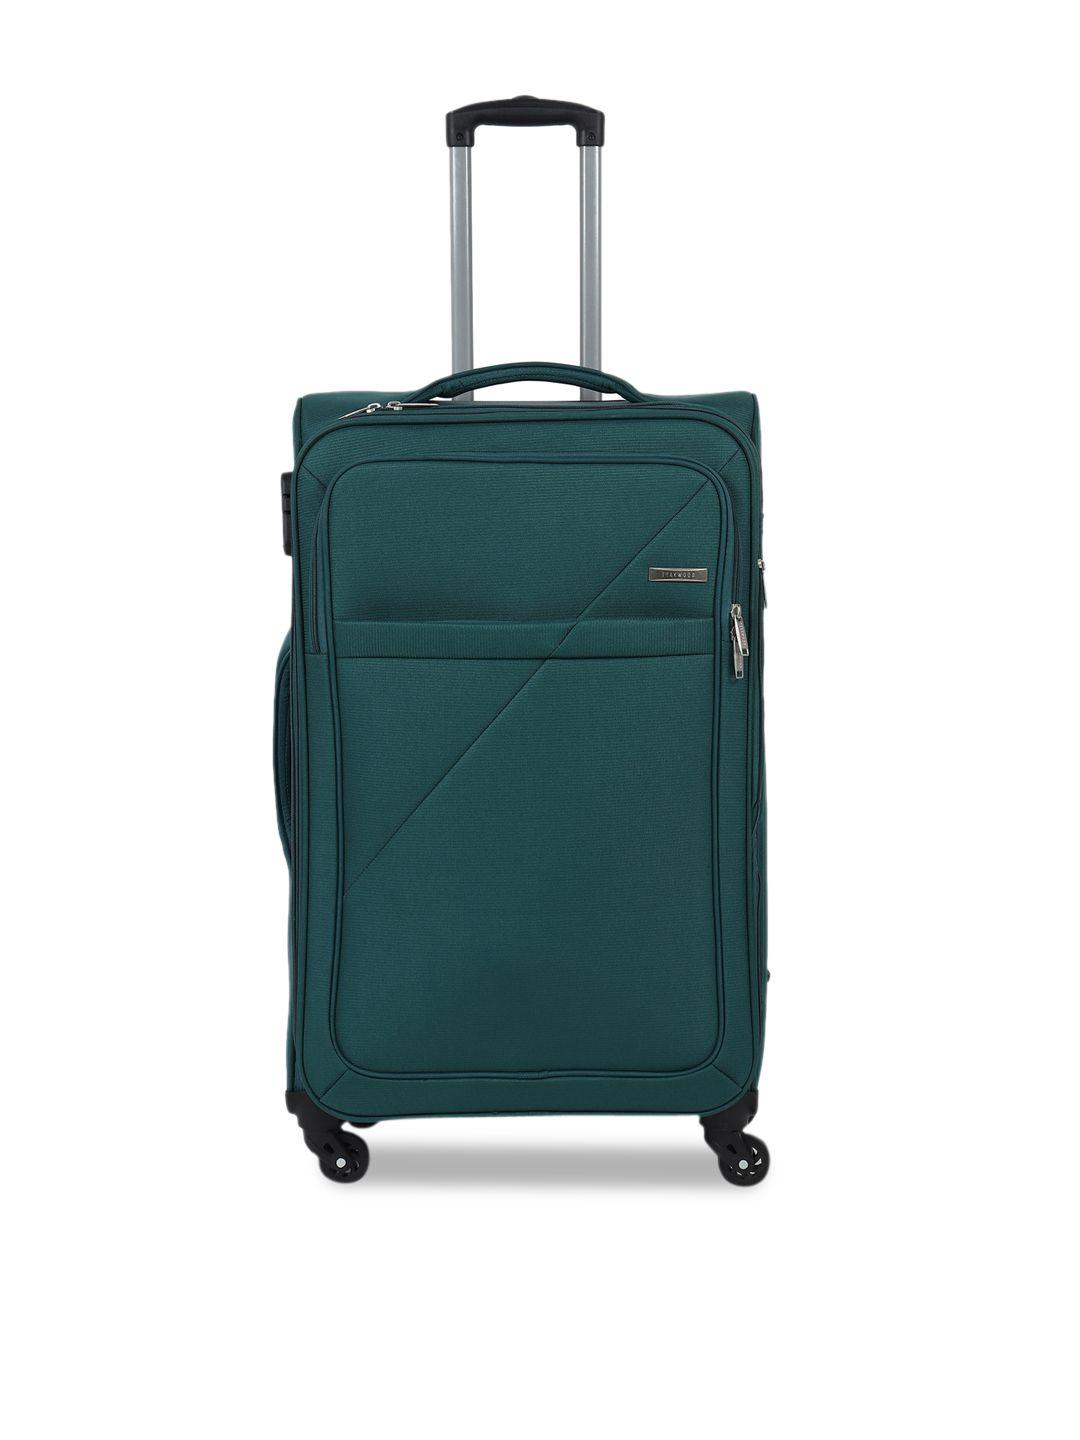 teakwood leathers green textured soft-sided large trolley suitcase